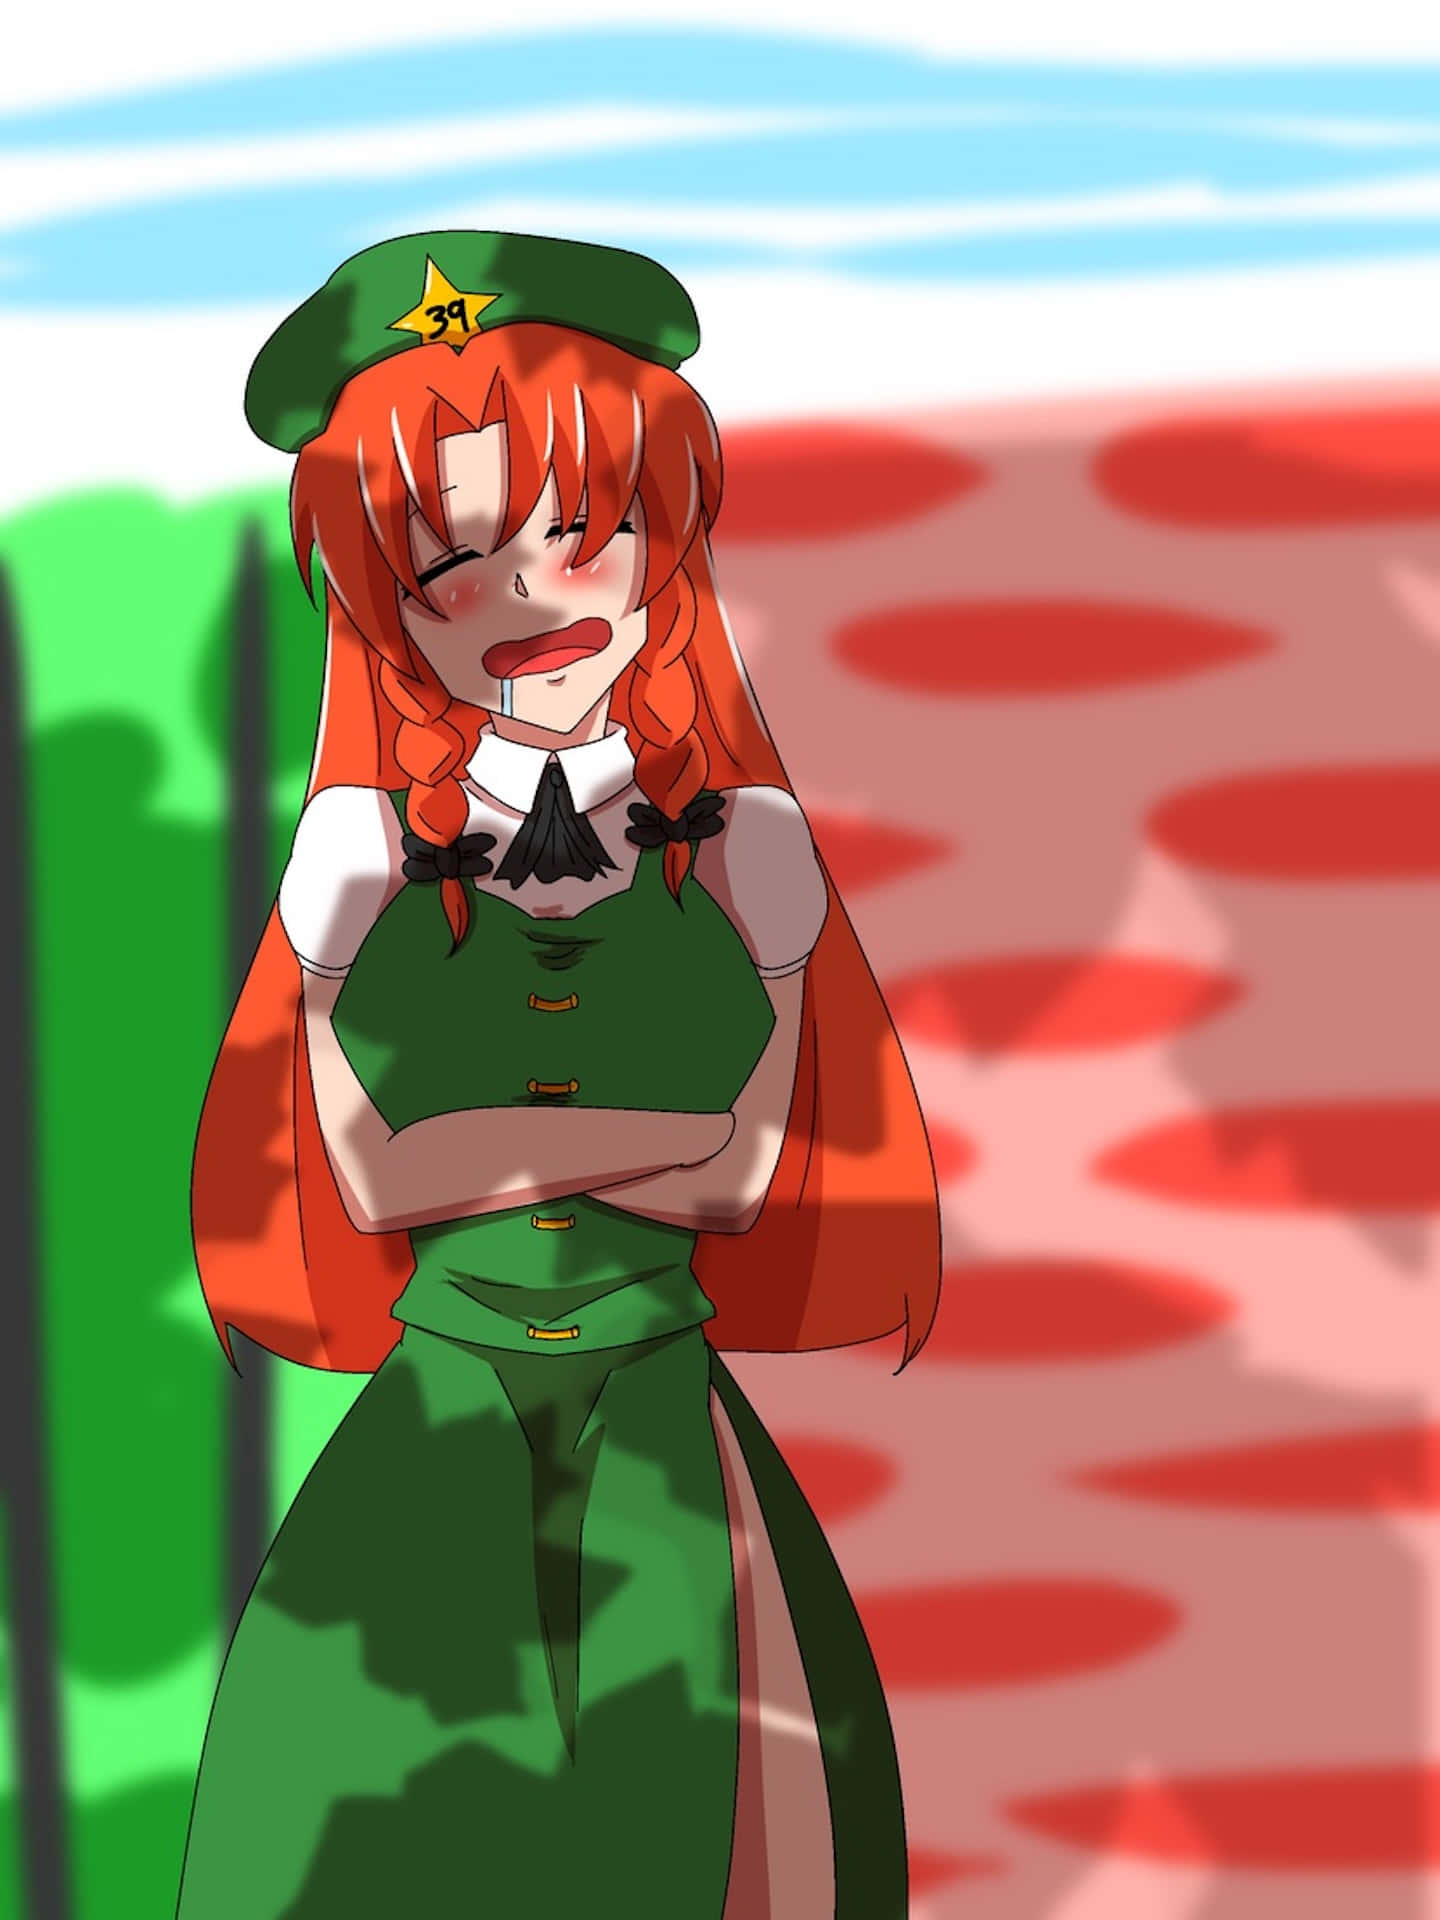 Red Haired Anime Girlin Green Outfit Wallpaper